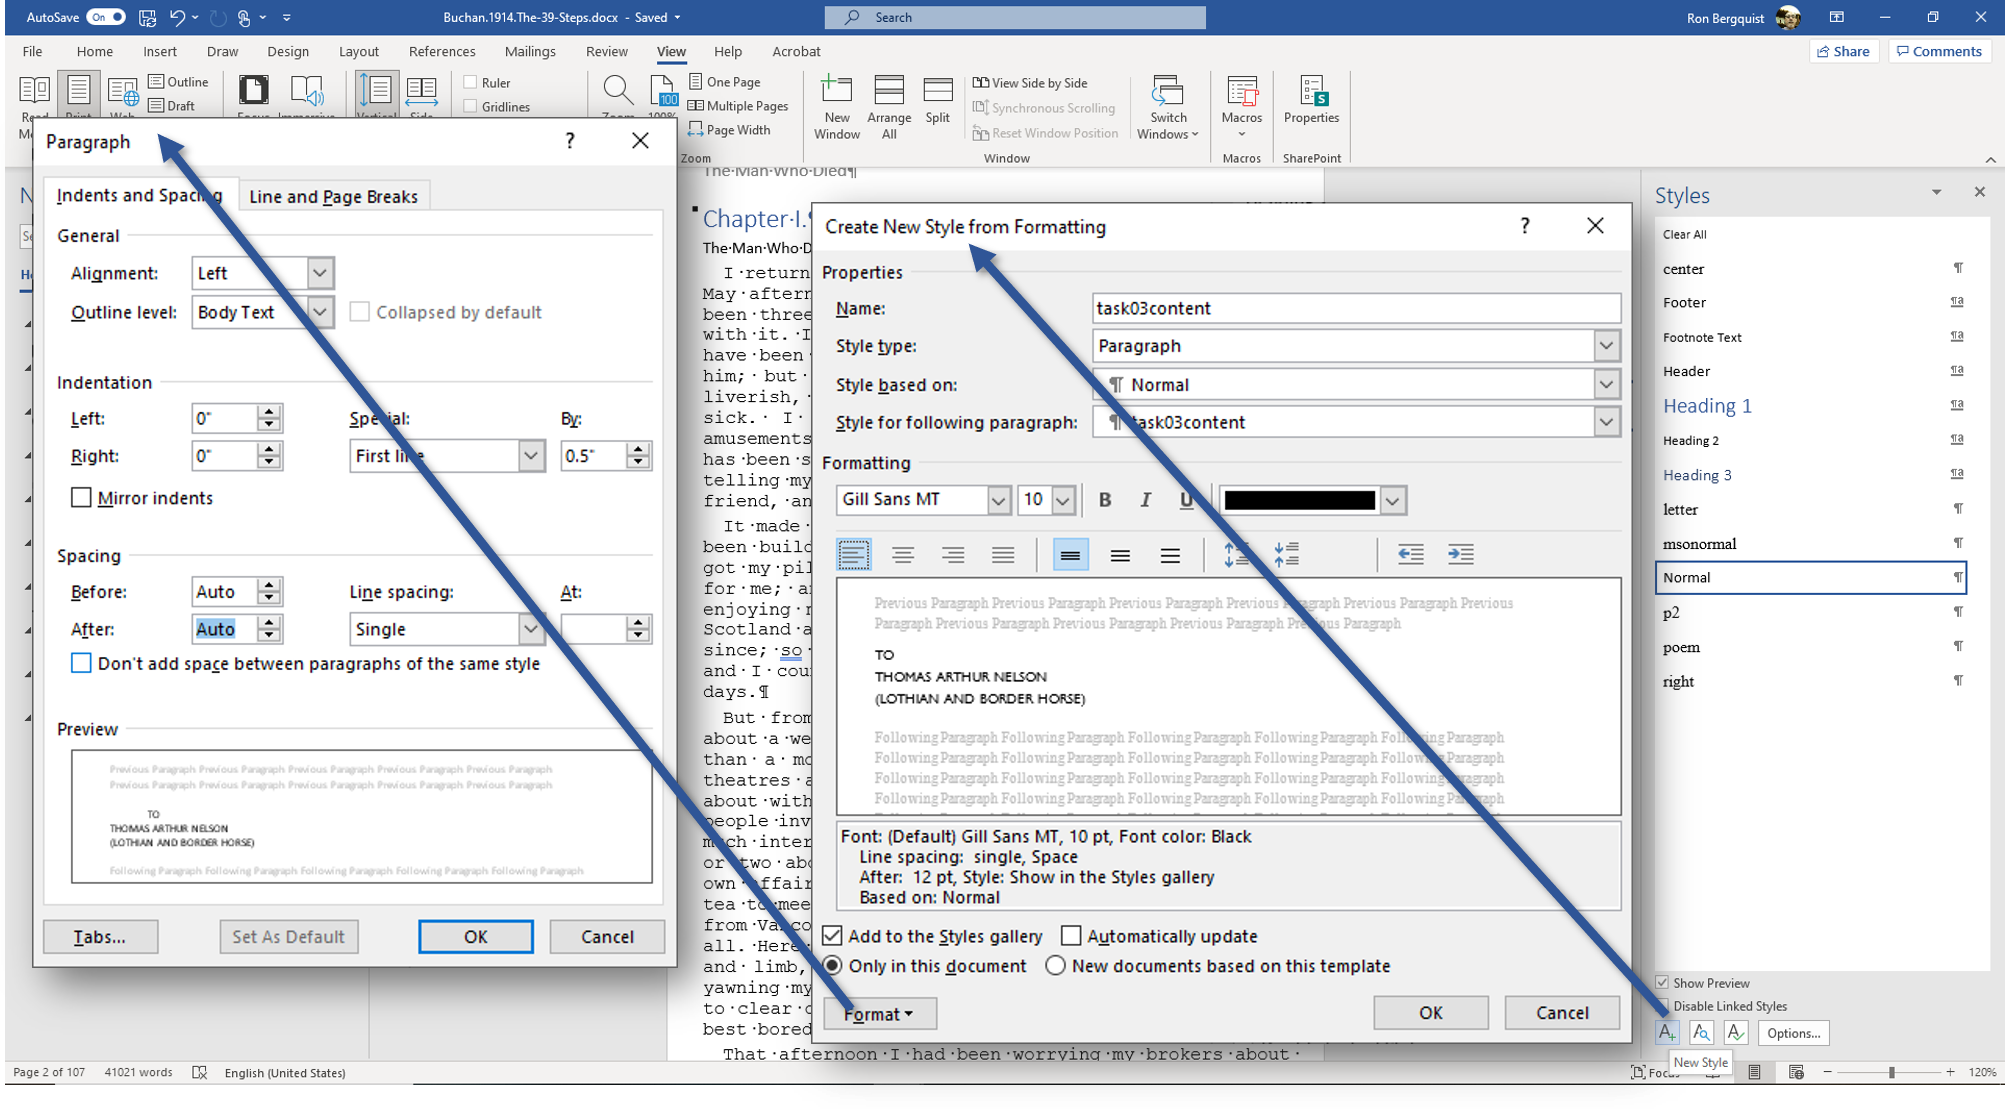 [MSWord 365 styles sidebar and dialog boxes]